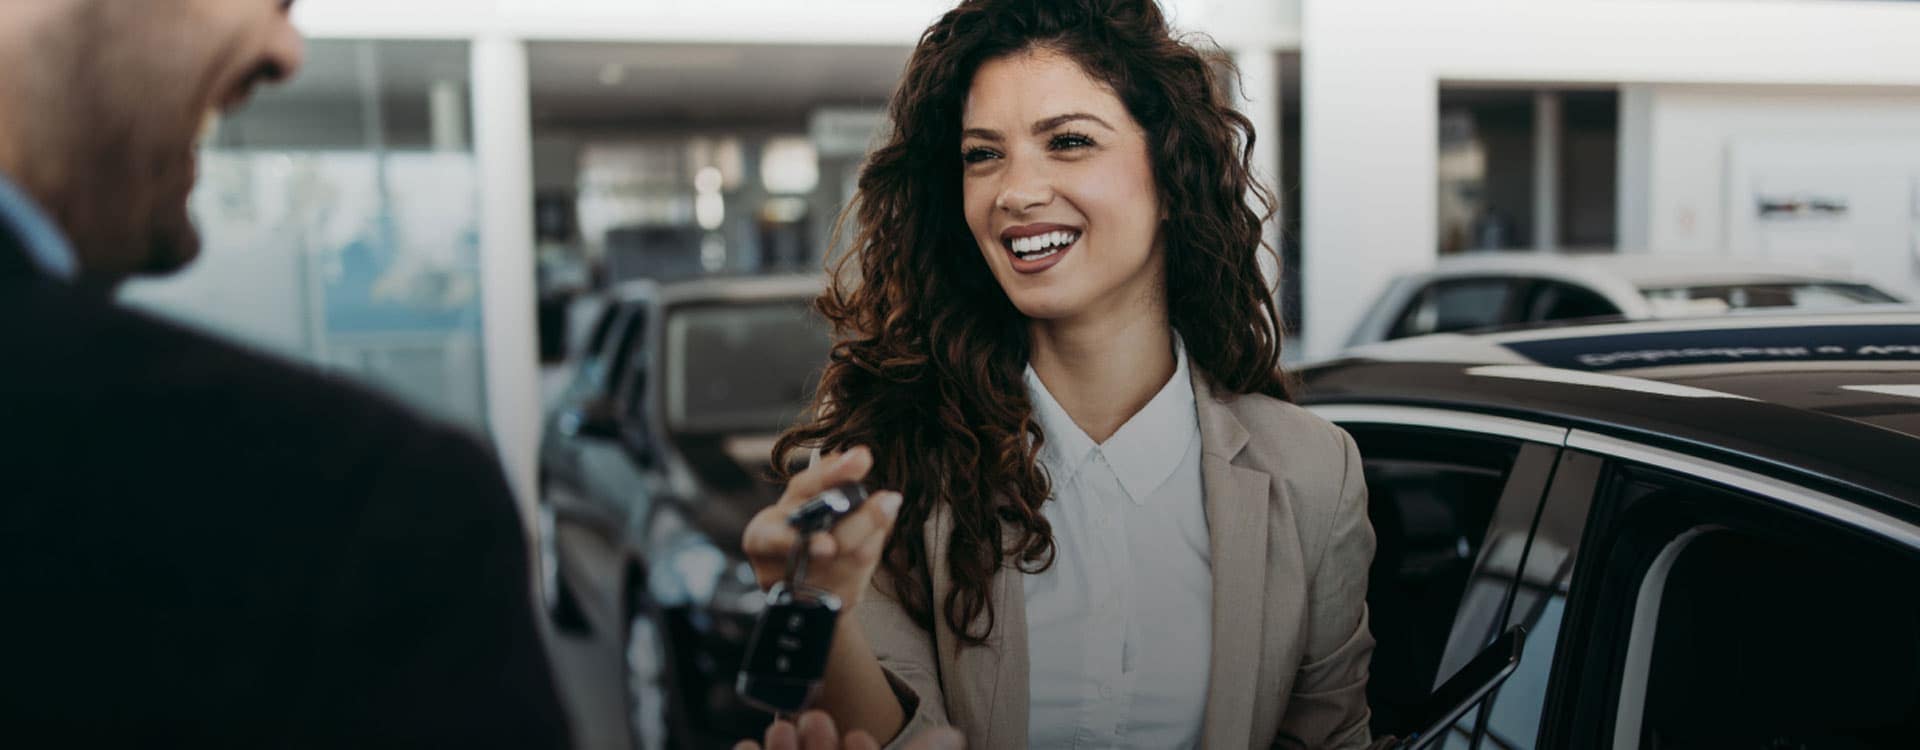 Woman being handed new car keys for her new vehicle